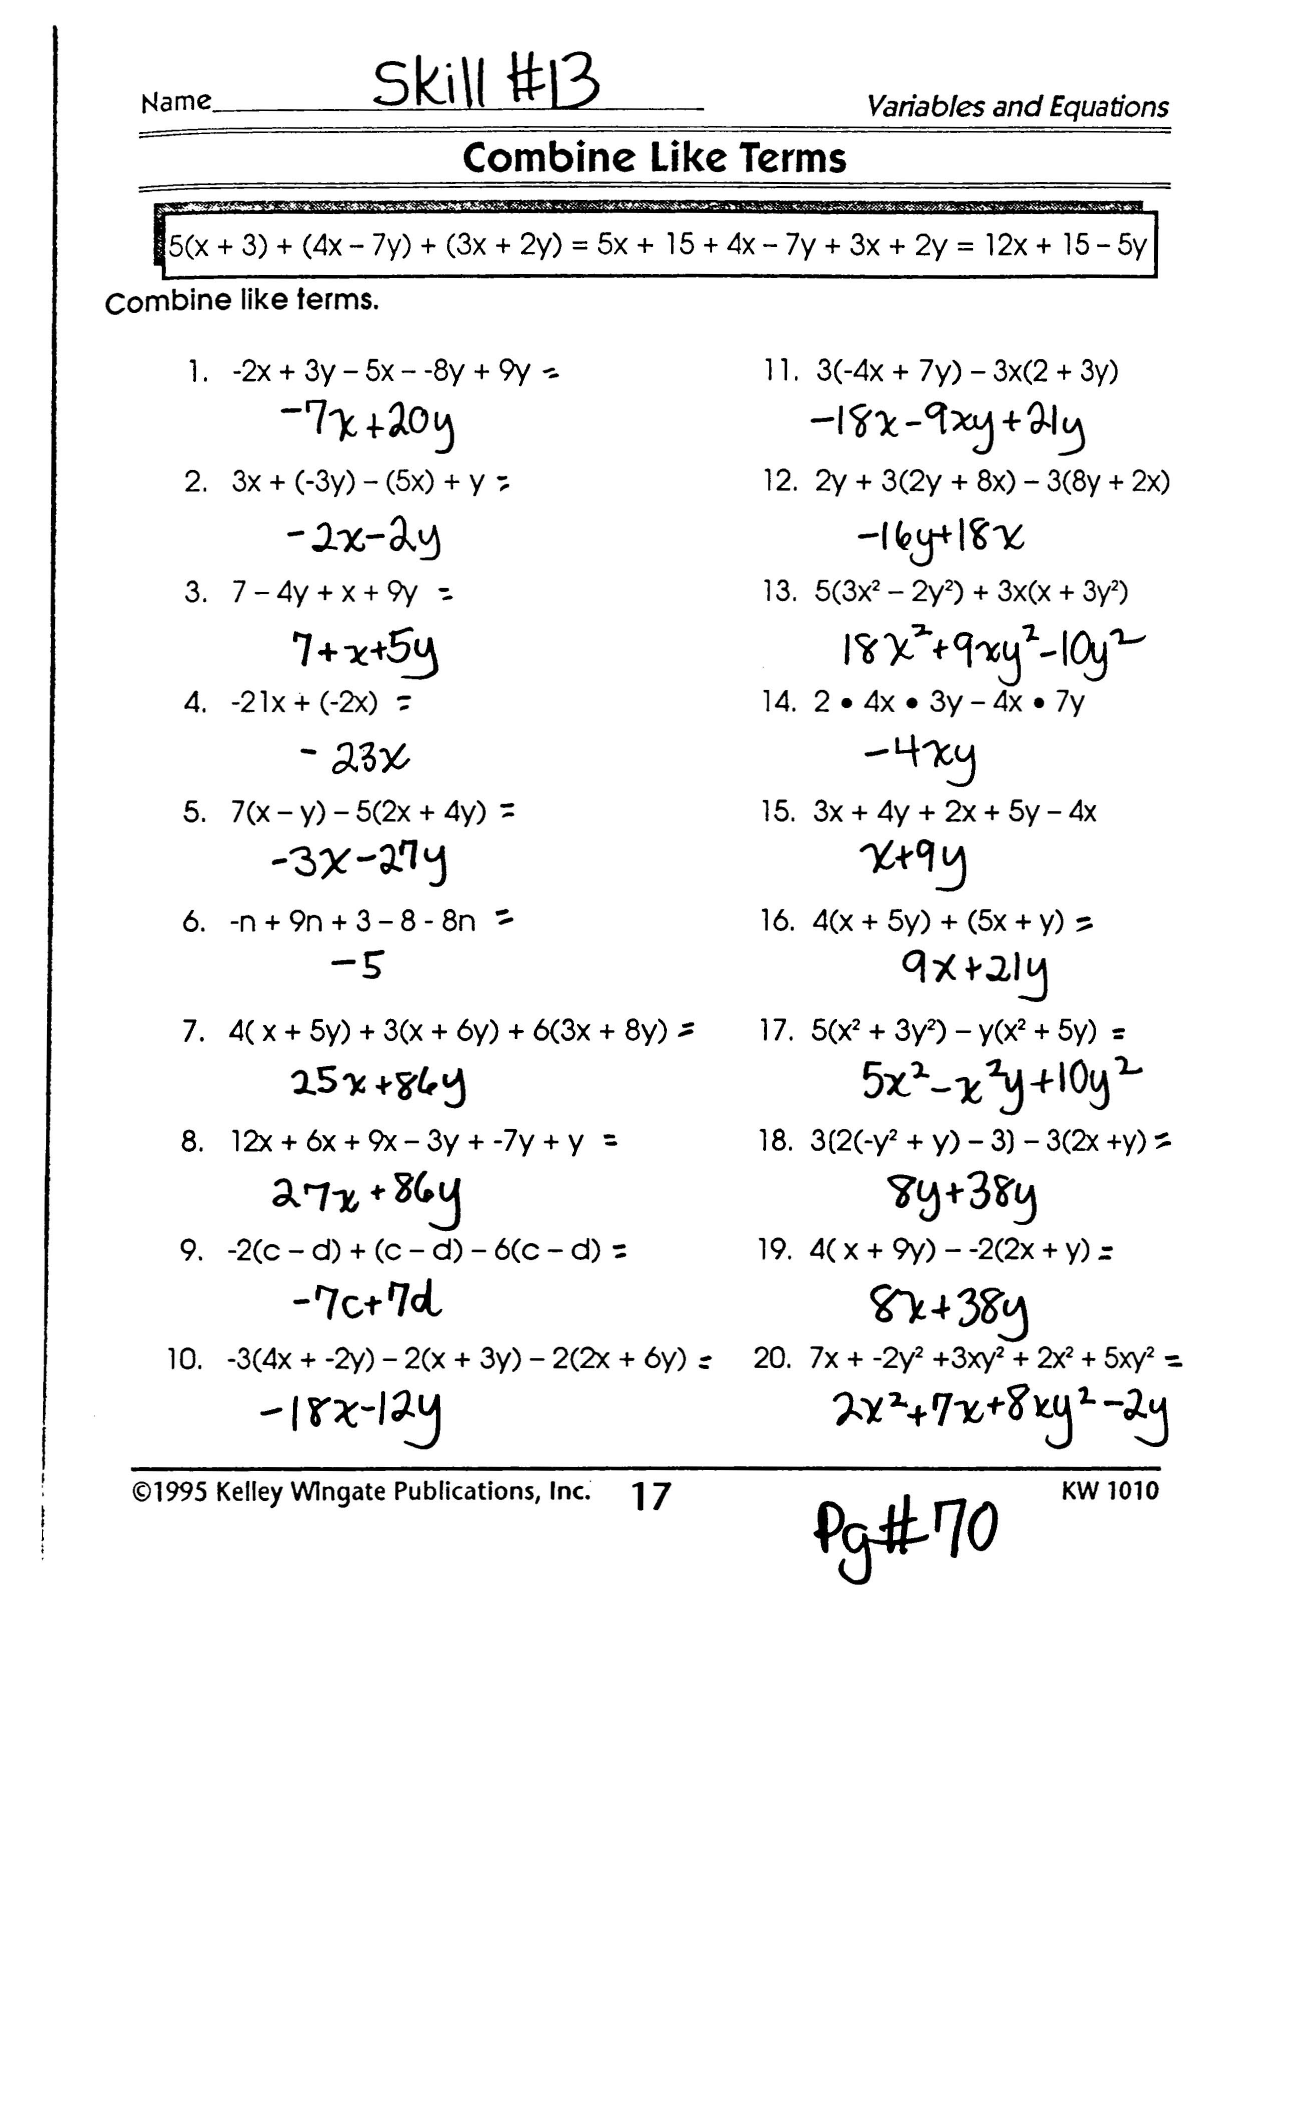 Skills Test Practice Book Solutions Pages 70